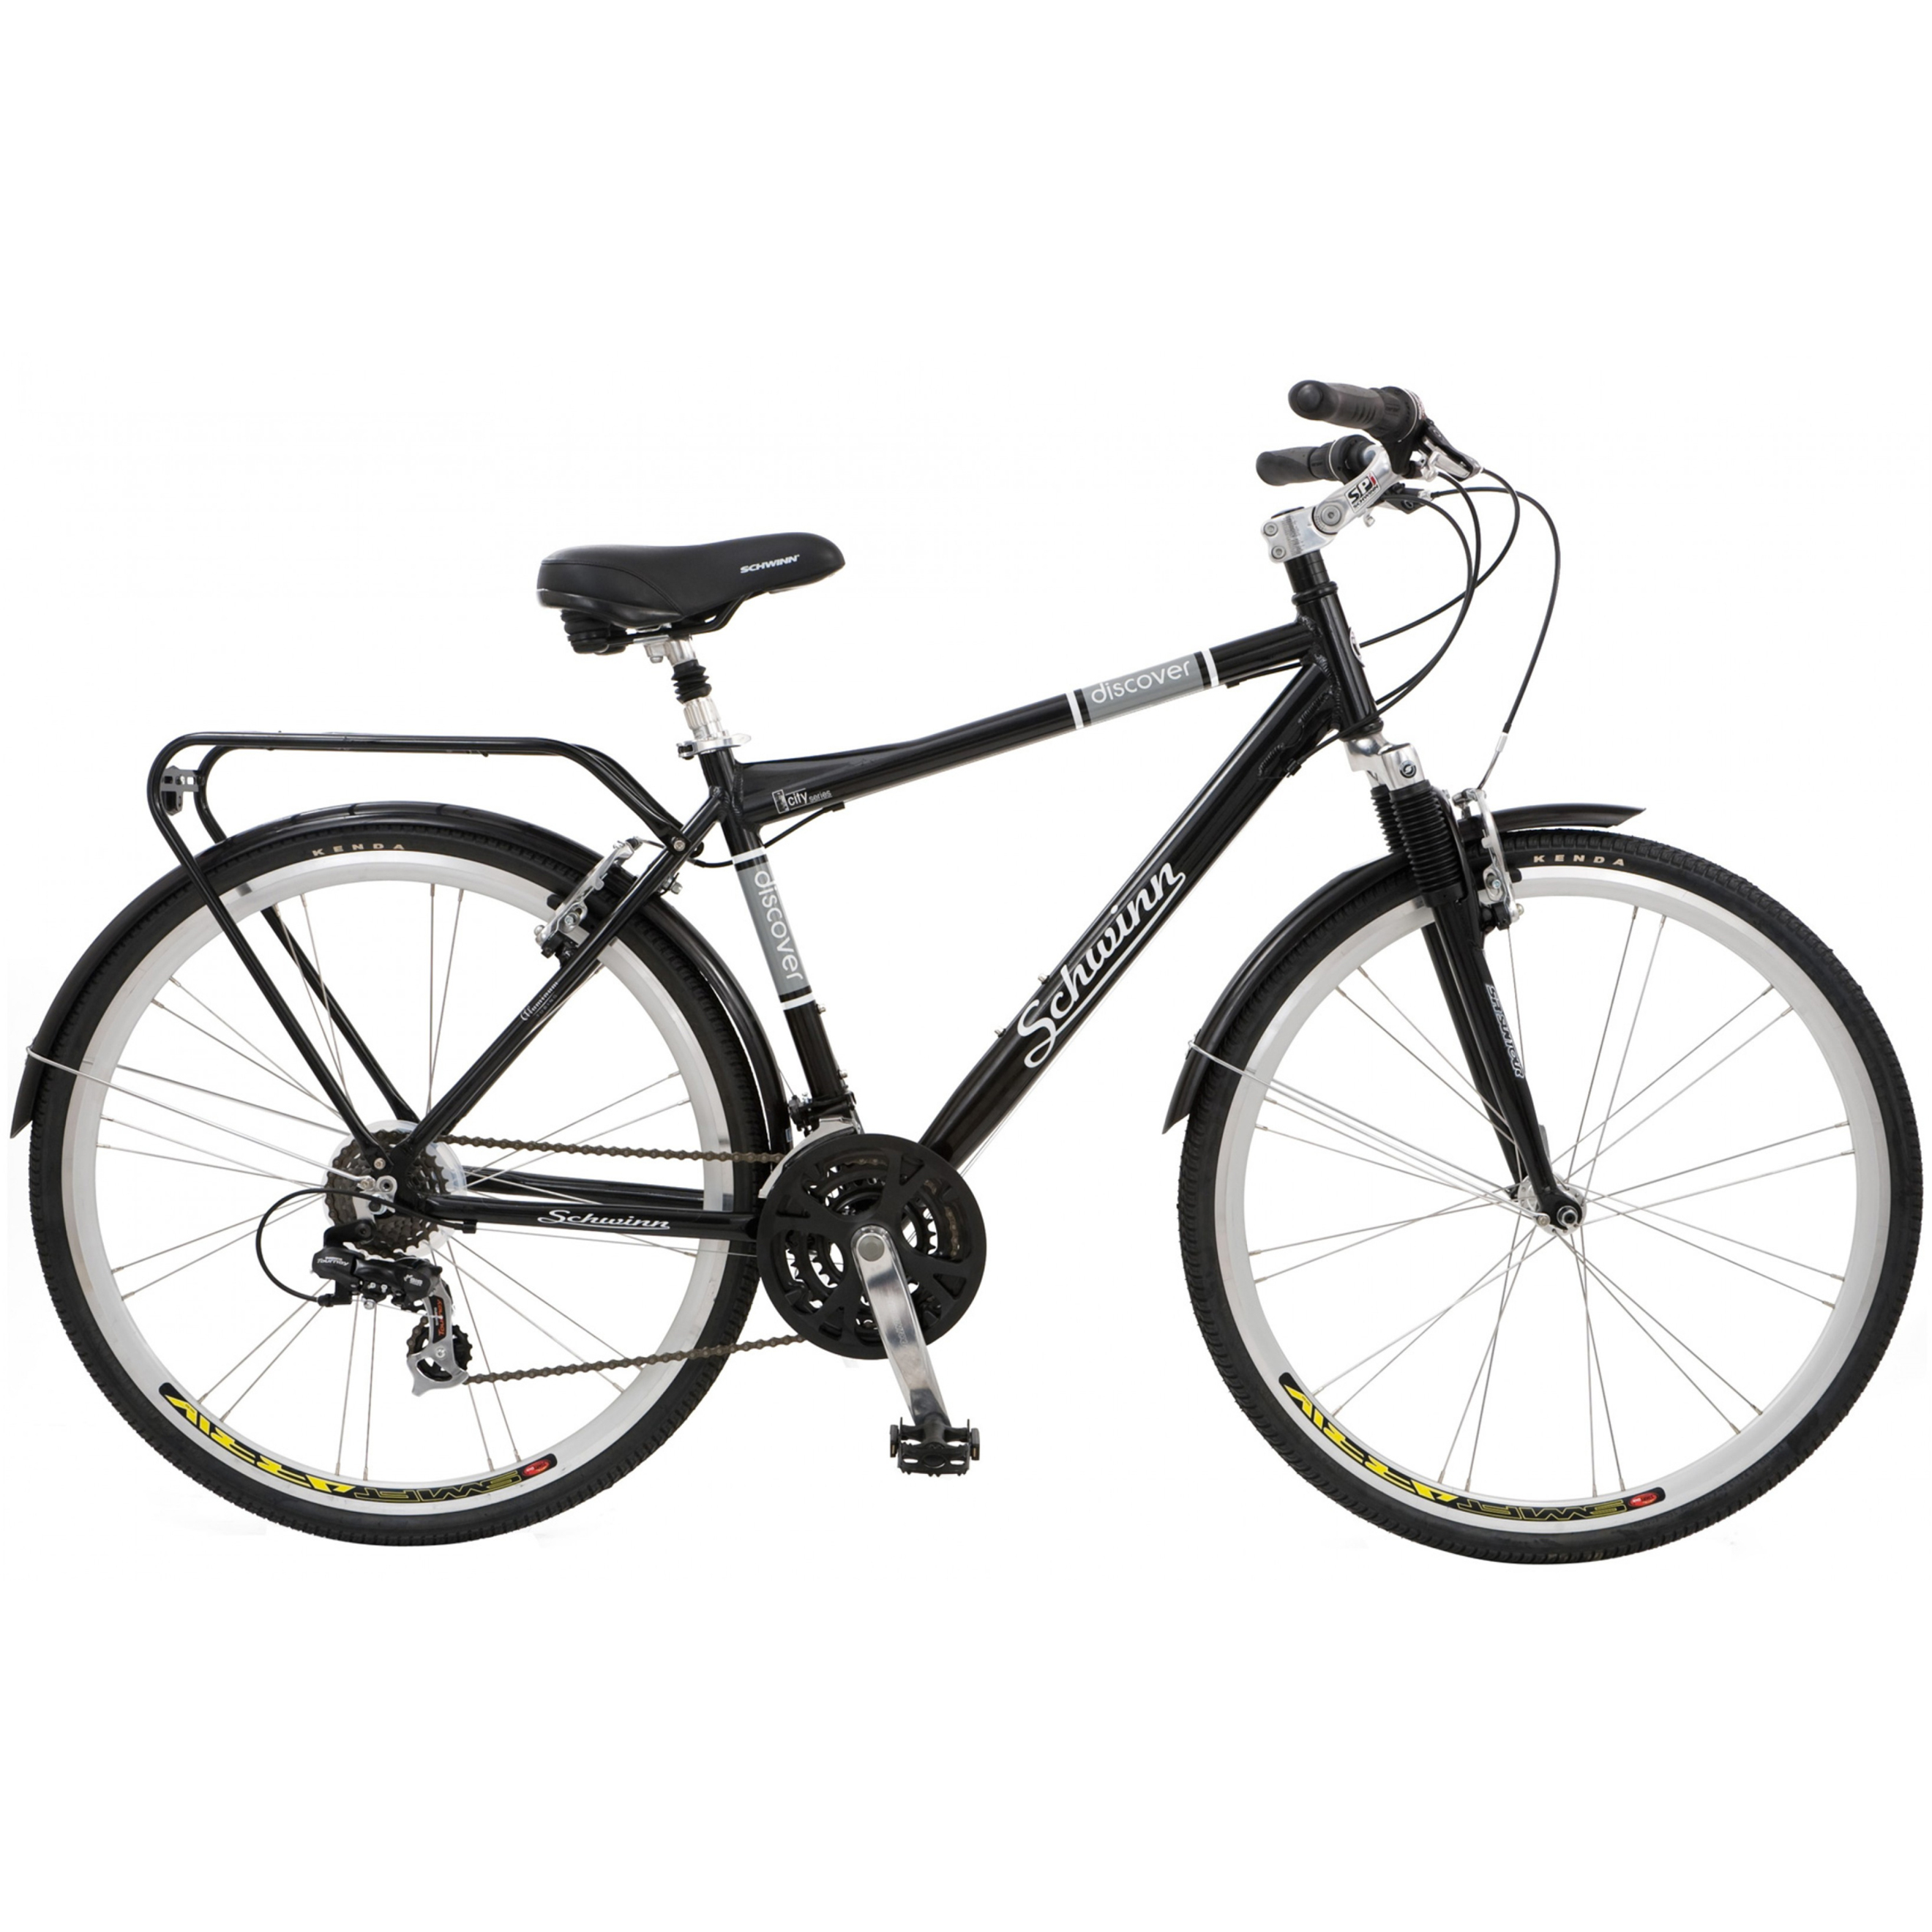 Schwinn Discover 700c Hybrid Bicycle with Full Fenders and Rear Cargo Rack - image 1 of 2